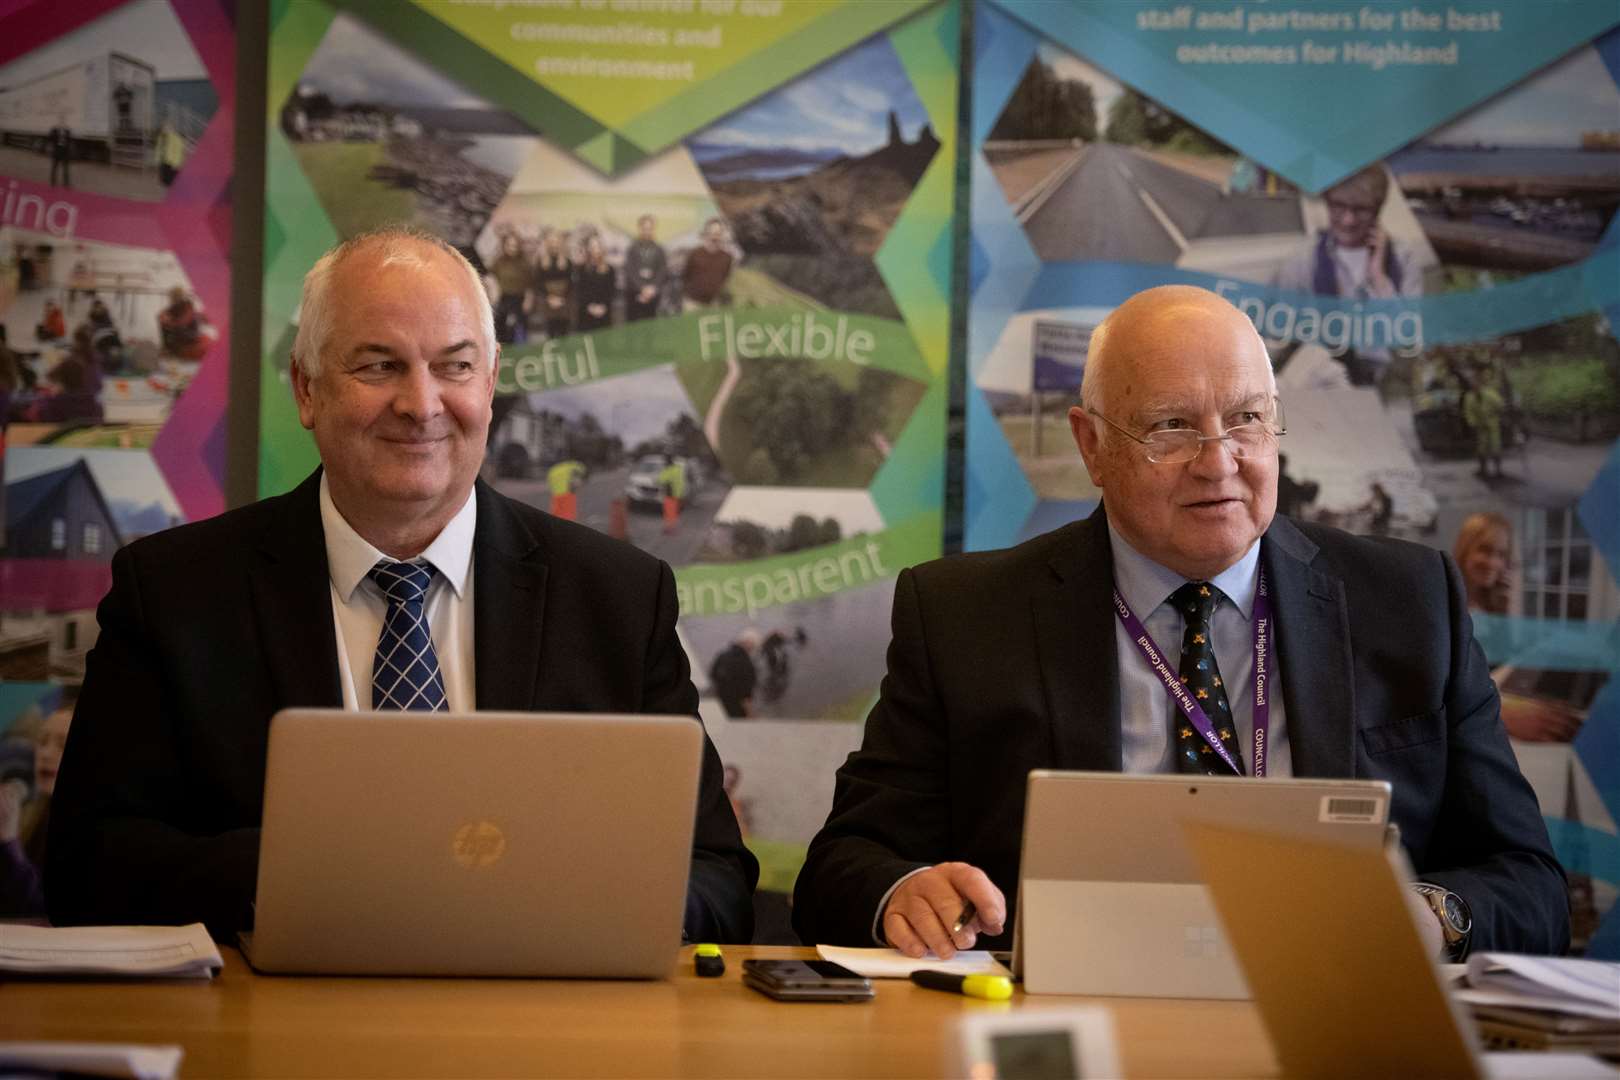 Highland Council Leader, Cllr Raymond Bremner and Councillor Bill Lobban outline a new council investment plan. Picture: Callum Mackay.